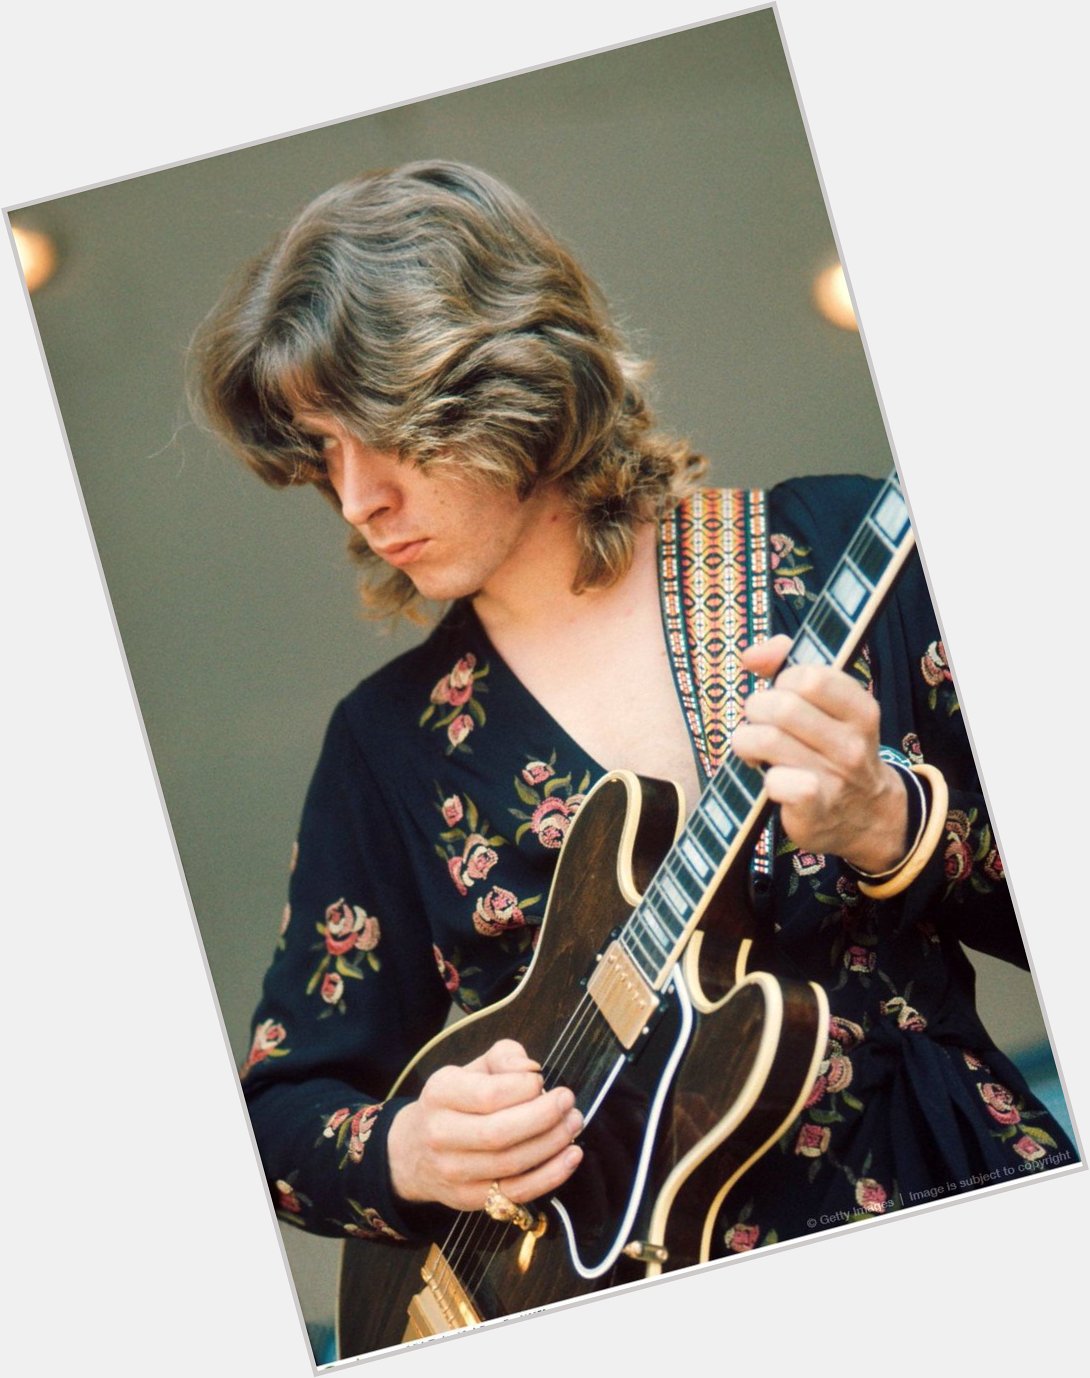 Happy Birthday to former Bluesbreaker and Rolling Stones guitarist Mick Taylor, born on this day in 1949. 